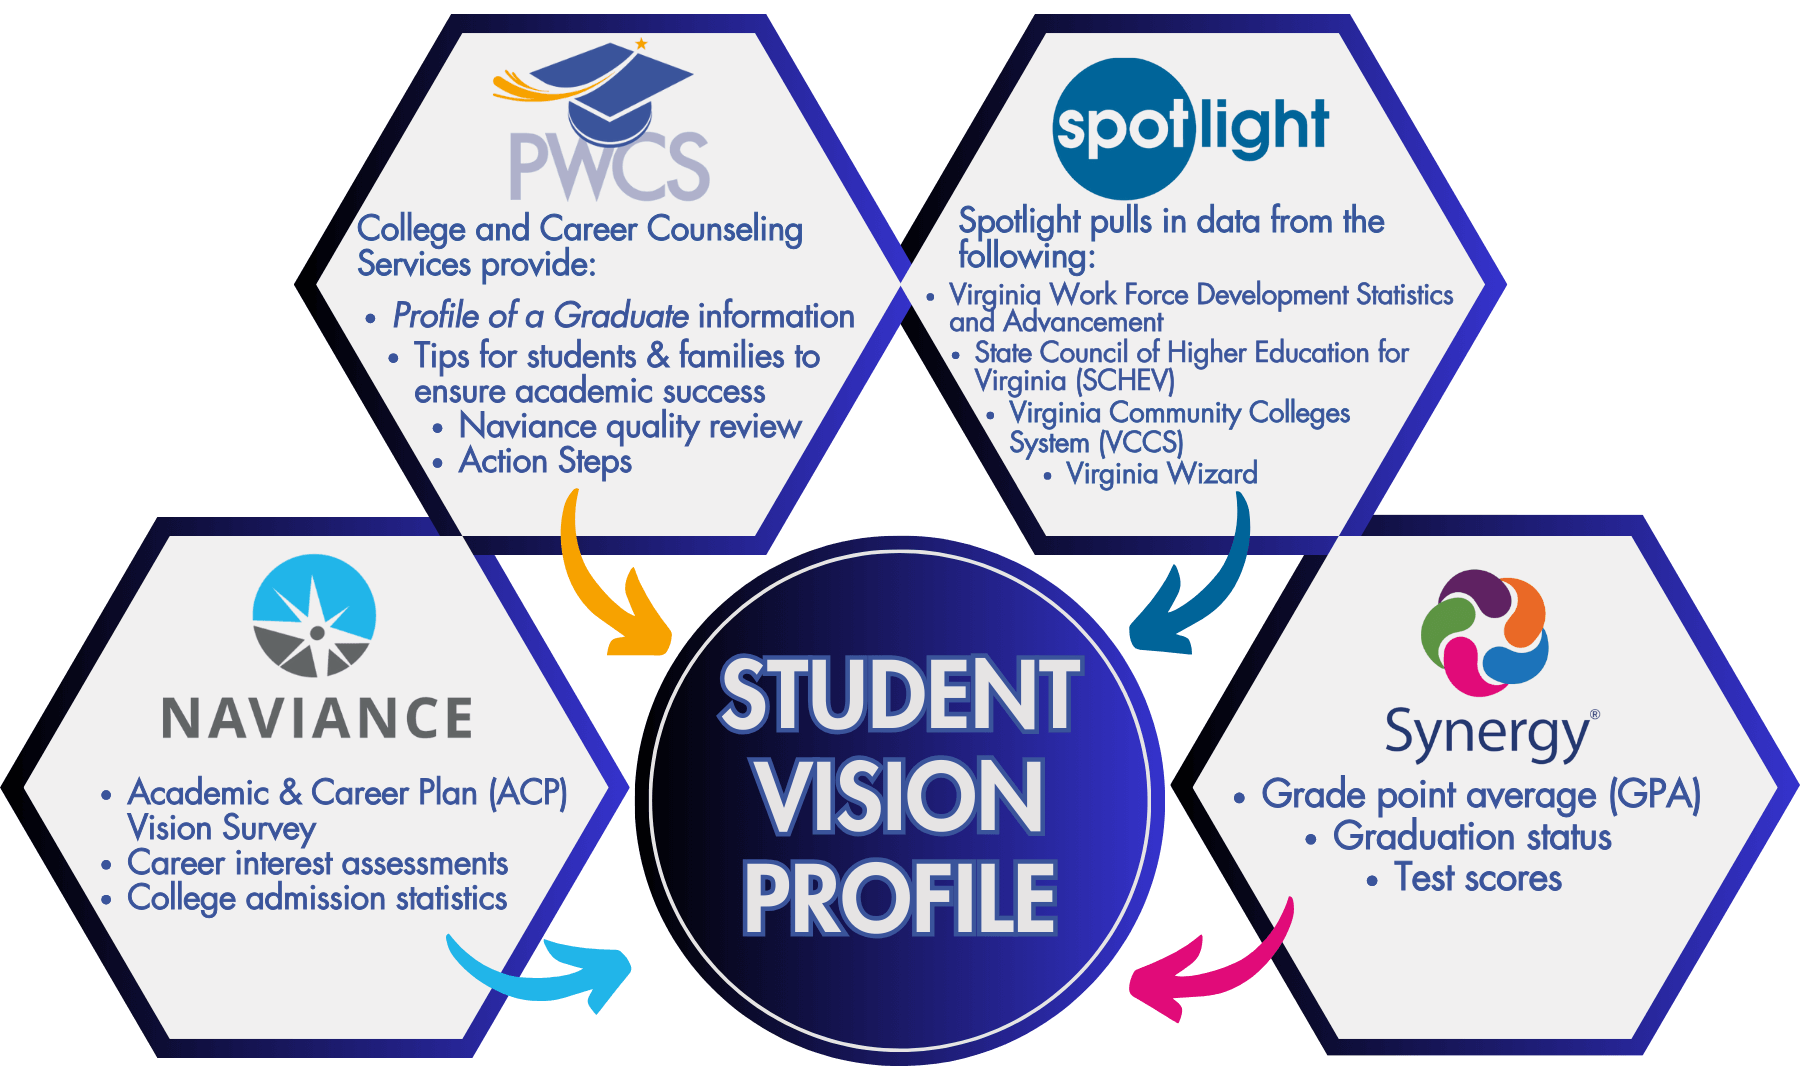 Infographic showing the four areas that provide student data for the Student Vision Profile. College and career counseling services provide Profile of a Graduate information, tips for students and families to ensure academic success, and action steps.  Pearson Spotlight provides Virginia Work Force Development Statistics and Advancement, State Council of Higher Education from Virginia data, Virginia Community Colleges System data, and Virginia Wizard data.  Naviance provides information from the Academic and Career Plan Vision Survey, Career interest assessments, and college admission statistics. Synergy provides the student's grade point average, graduation status, and test scores.